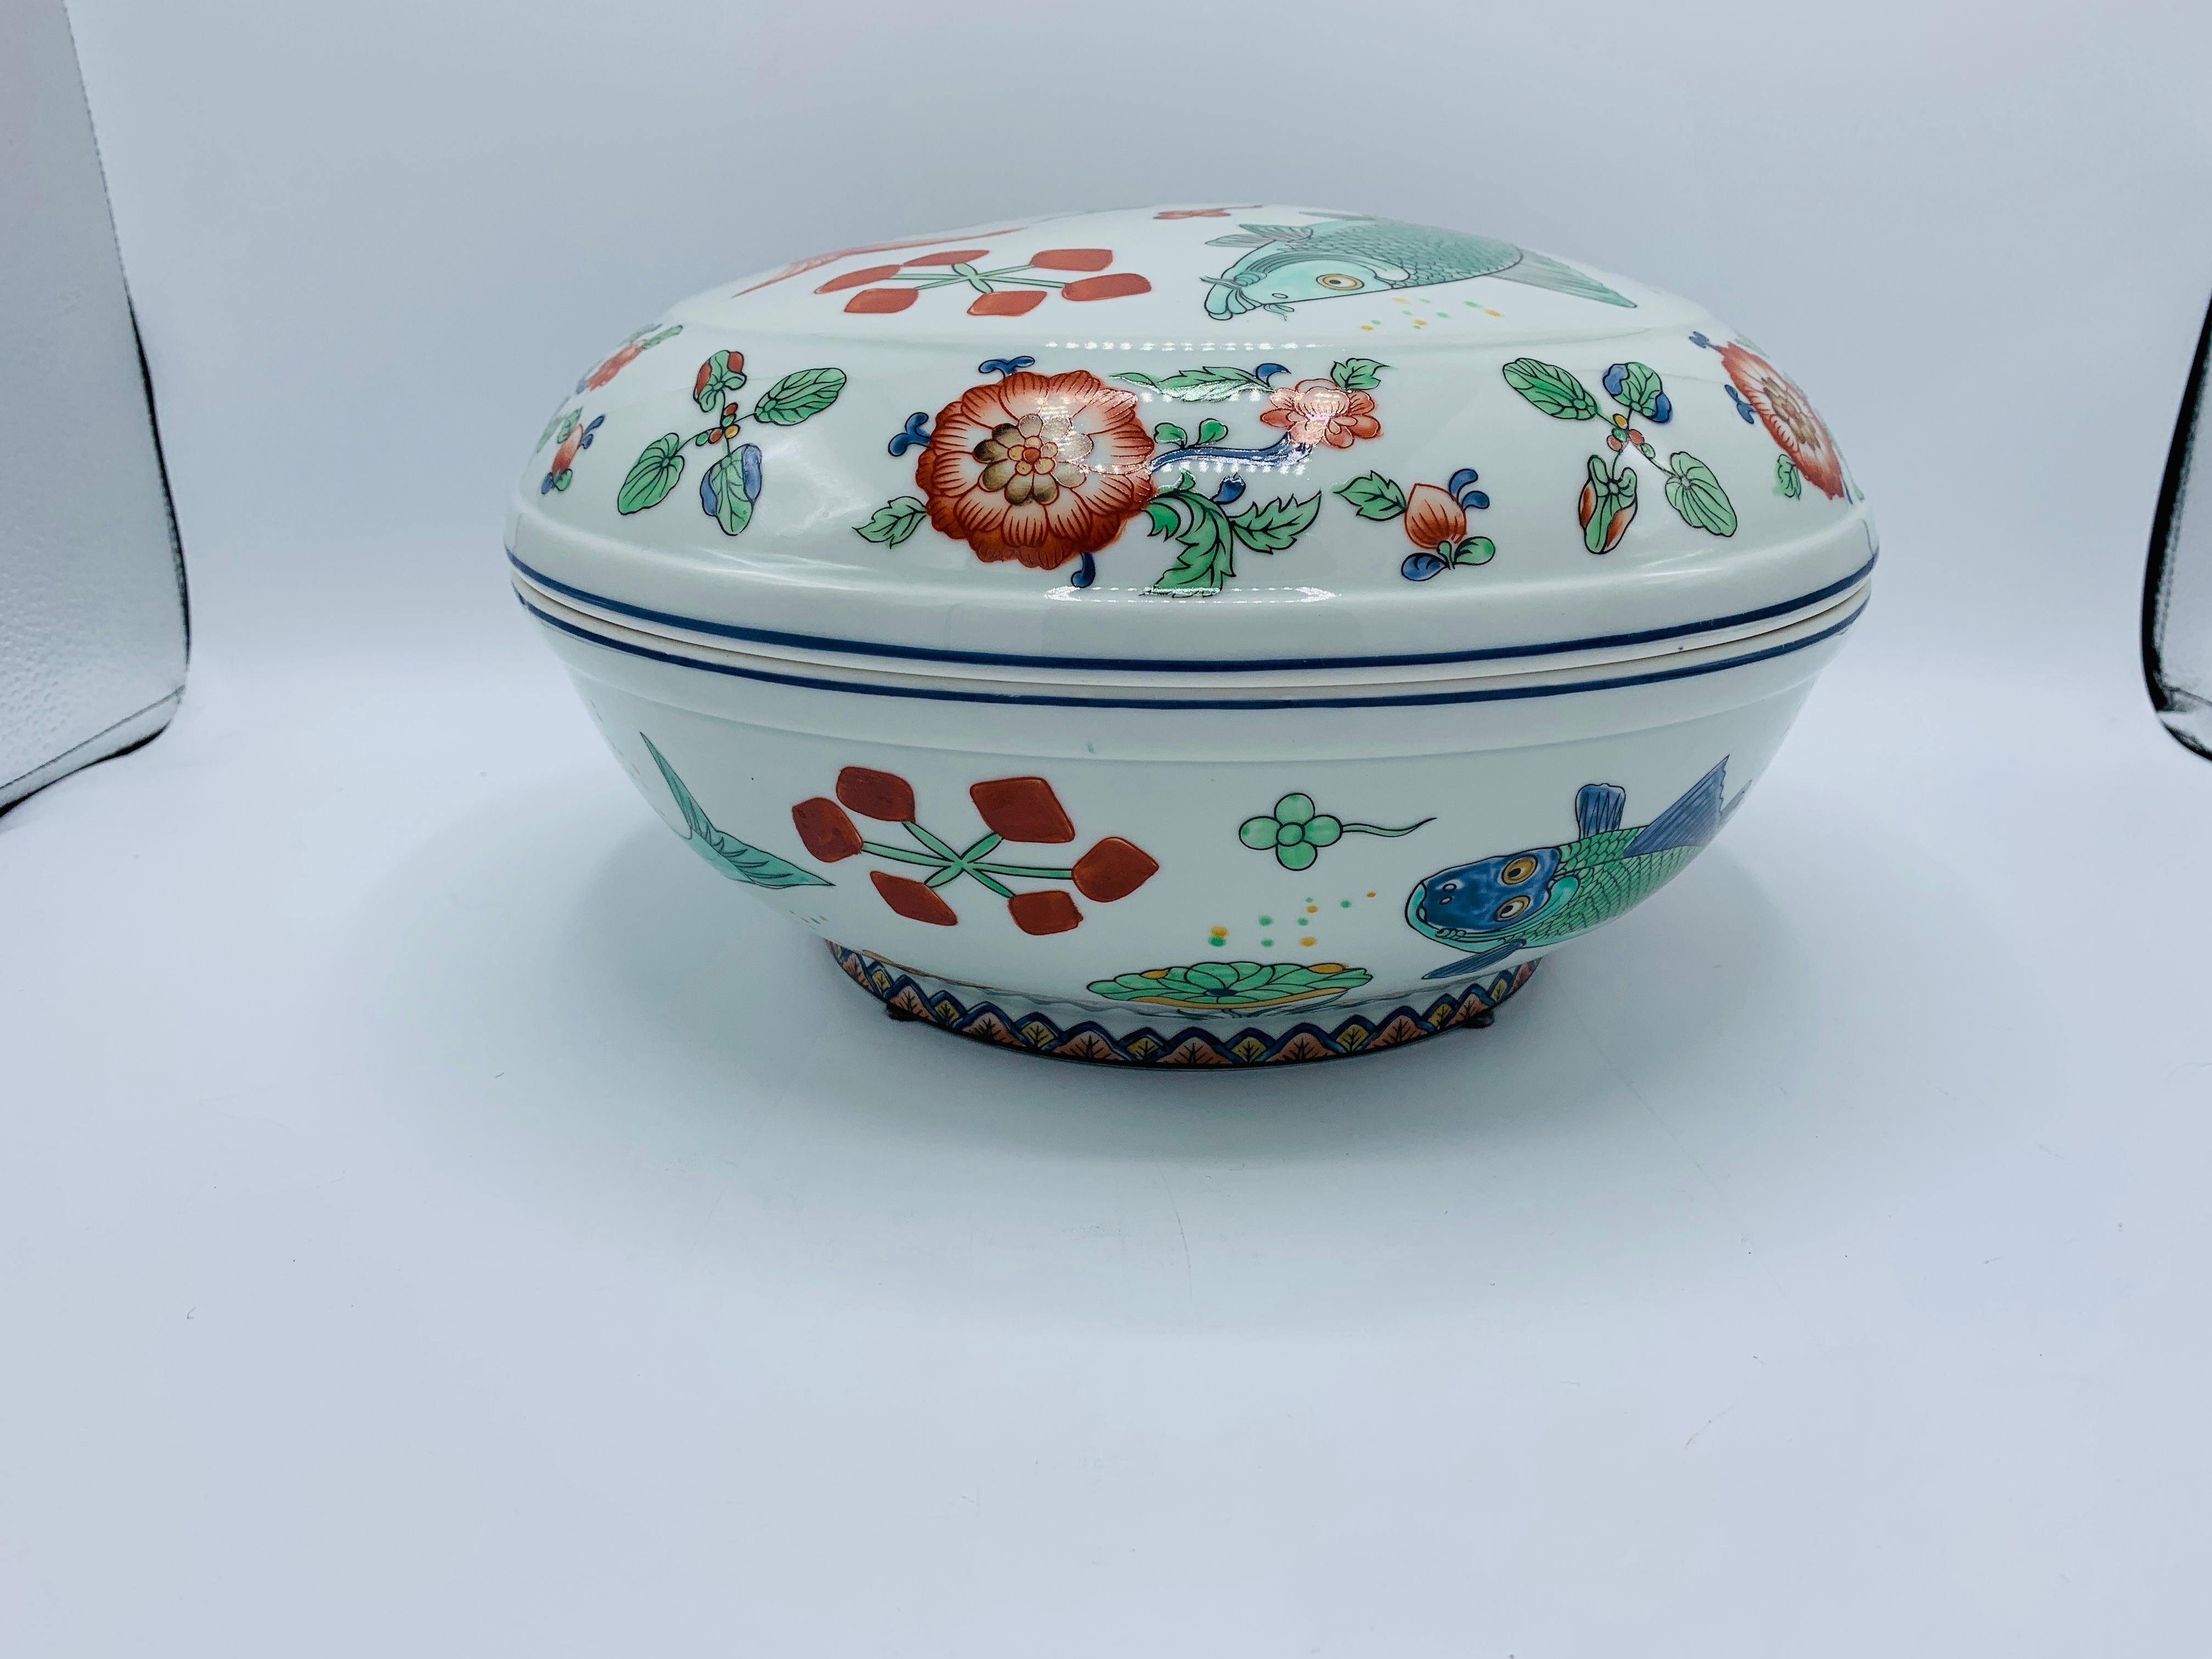 Listed is a gorgeous, 1960s chinoiserie porcelain lidded tureen bowl. The piece has a beautiful, hand painted fish motif all-over. Perfect for formal serving! Heavy, weighing 6.6lbs.